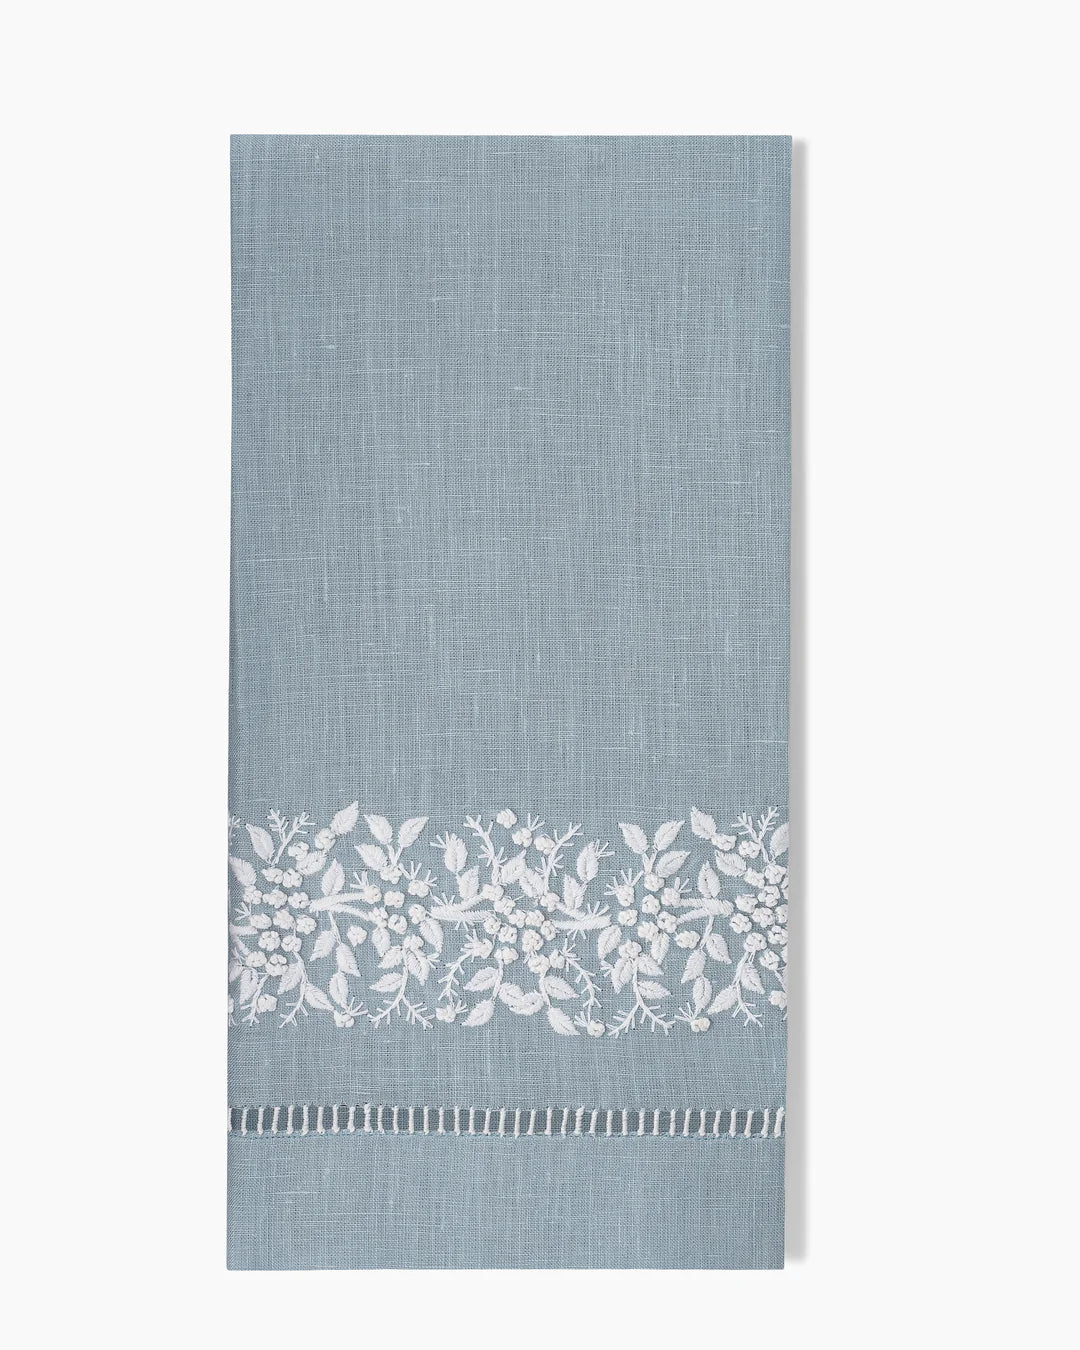 Jardin Classic Linen Hand Towels in Sky Blue, Set of Two